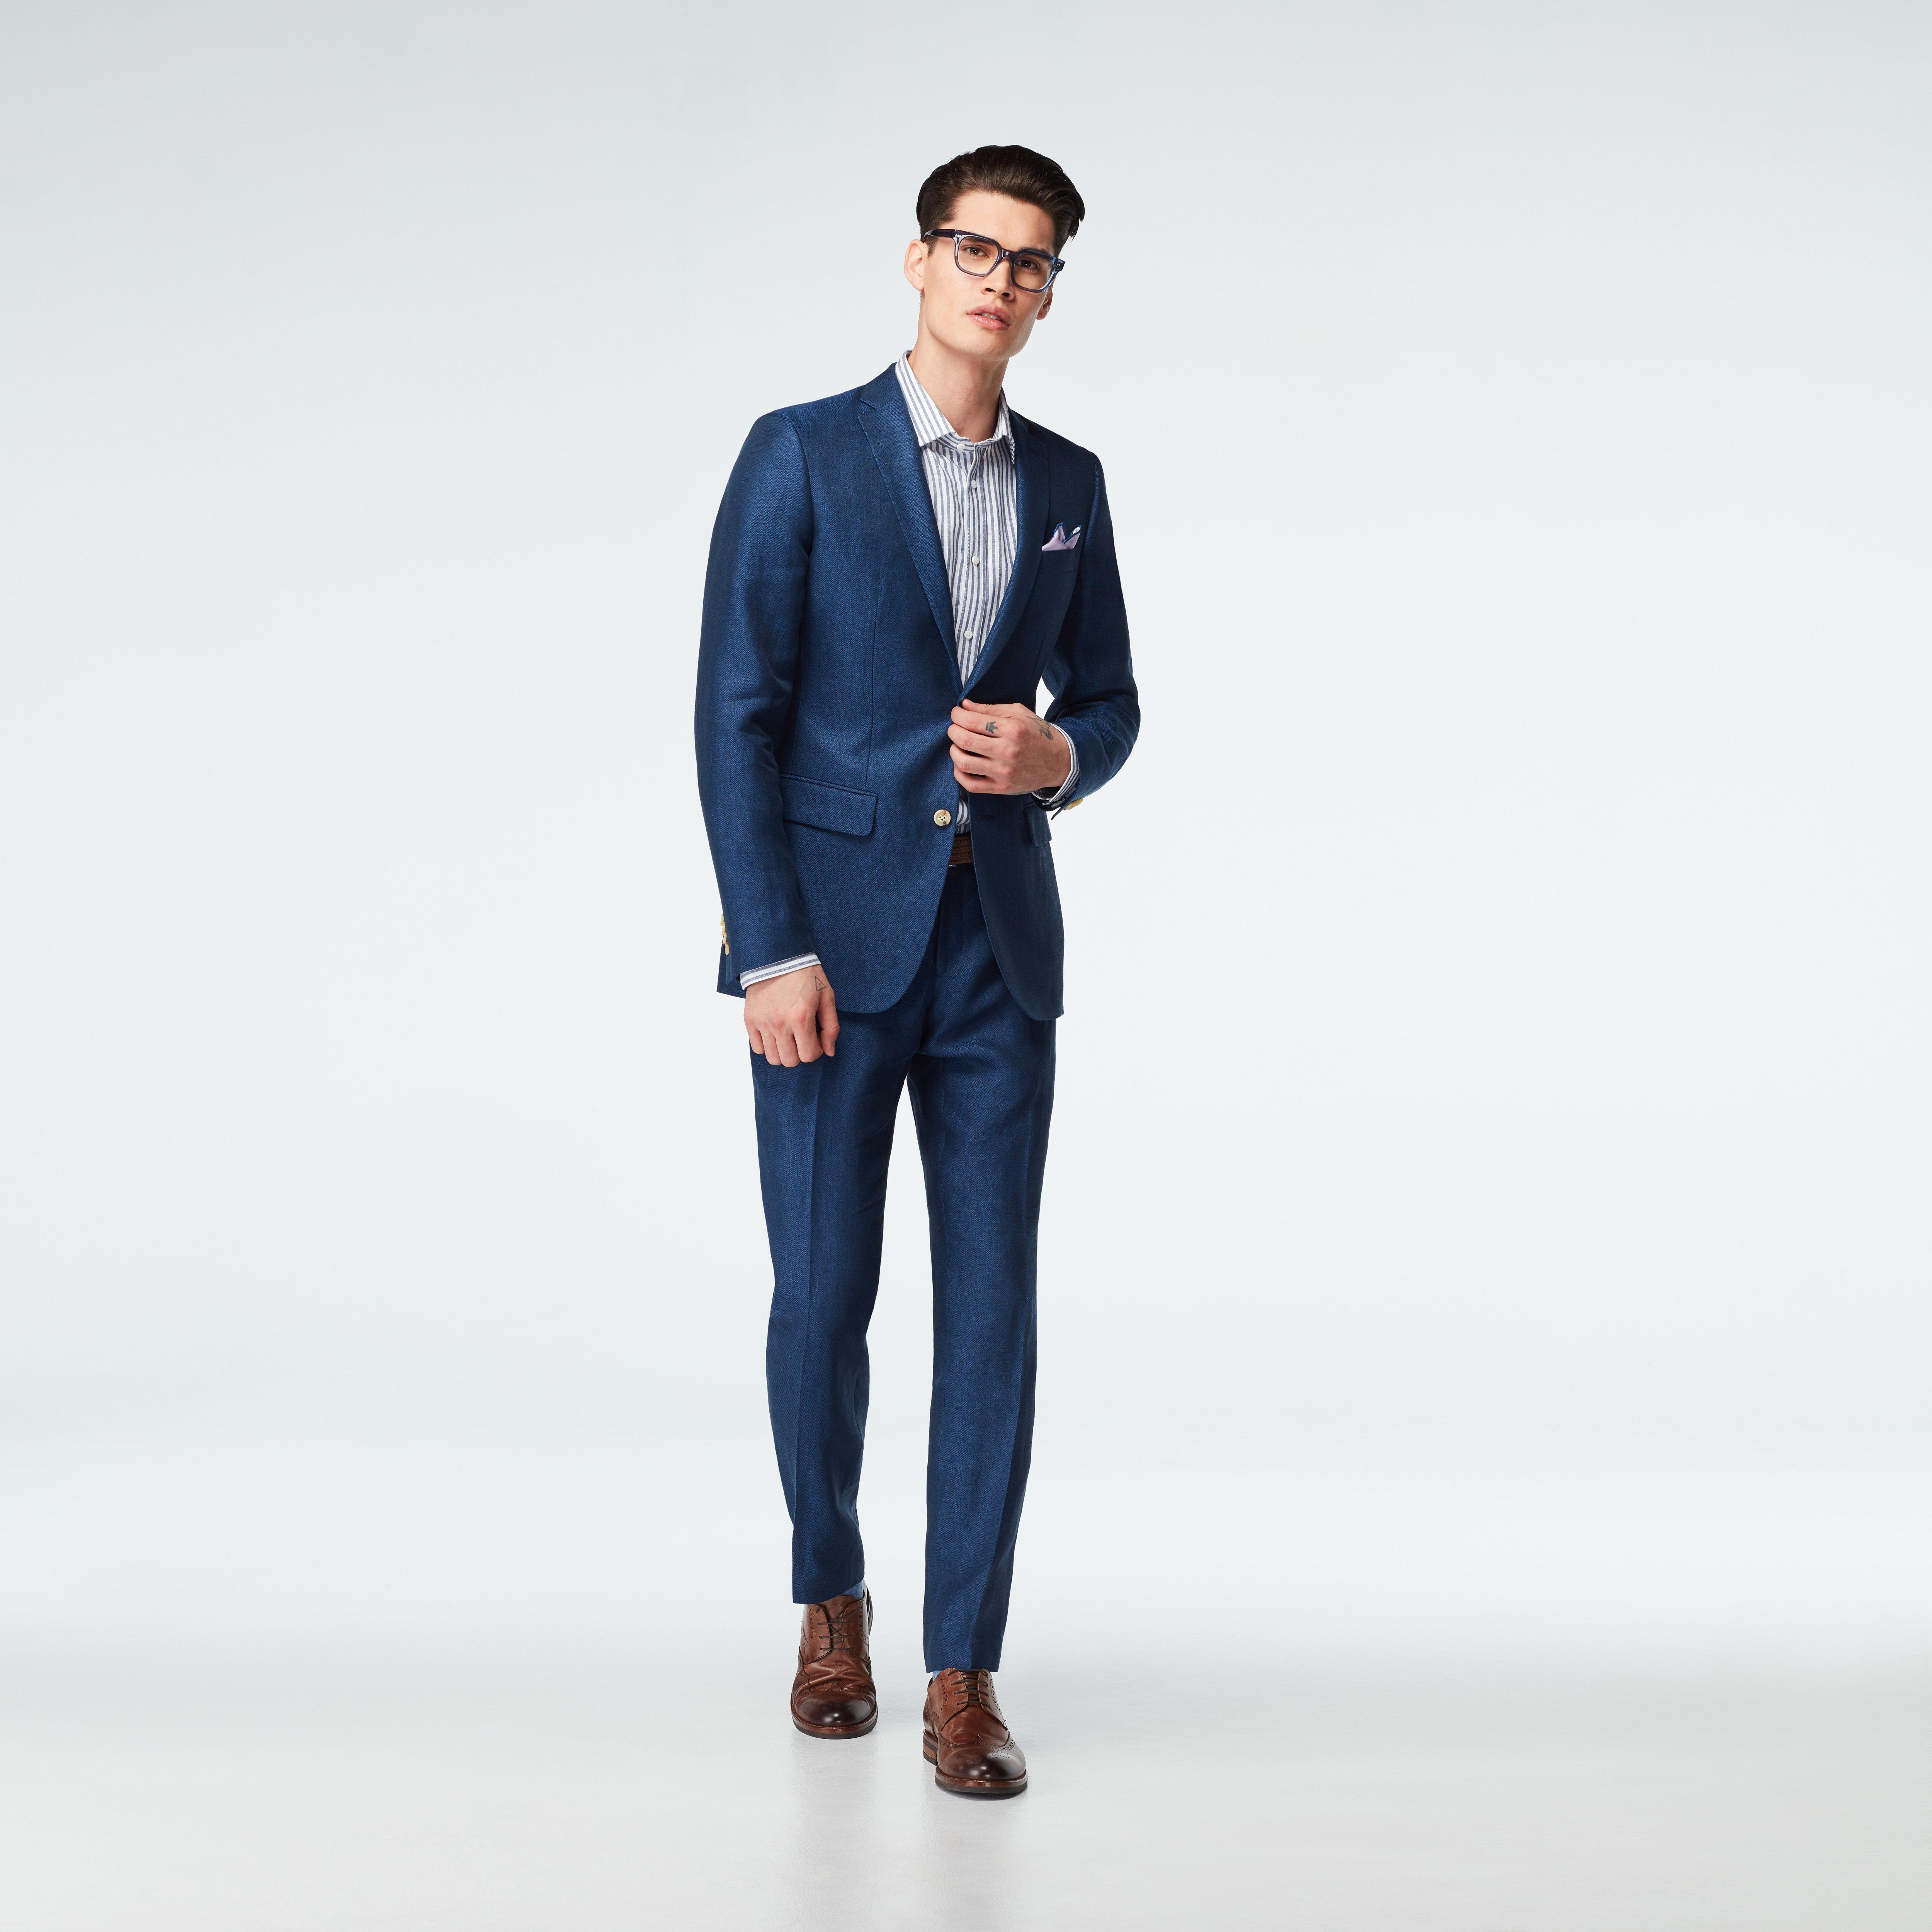 Indochino | Indochino Review | Indochino Suit Review - Trusted and  Independent: July 2010